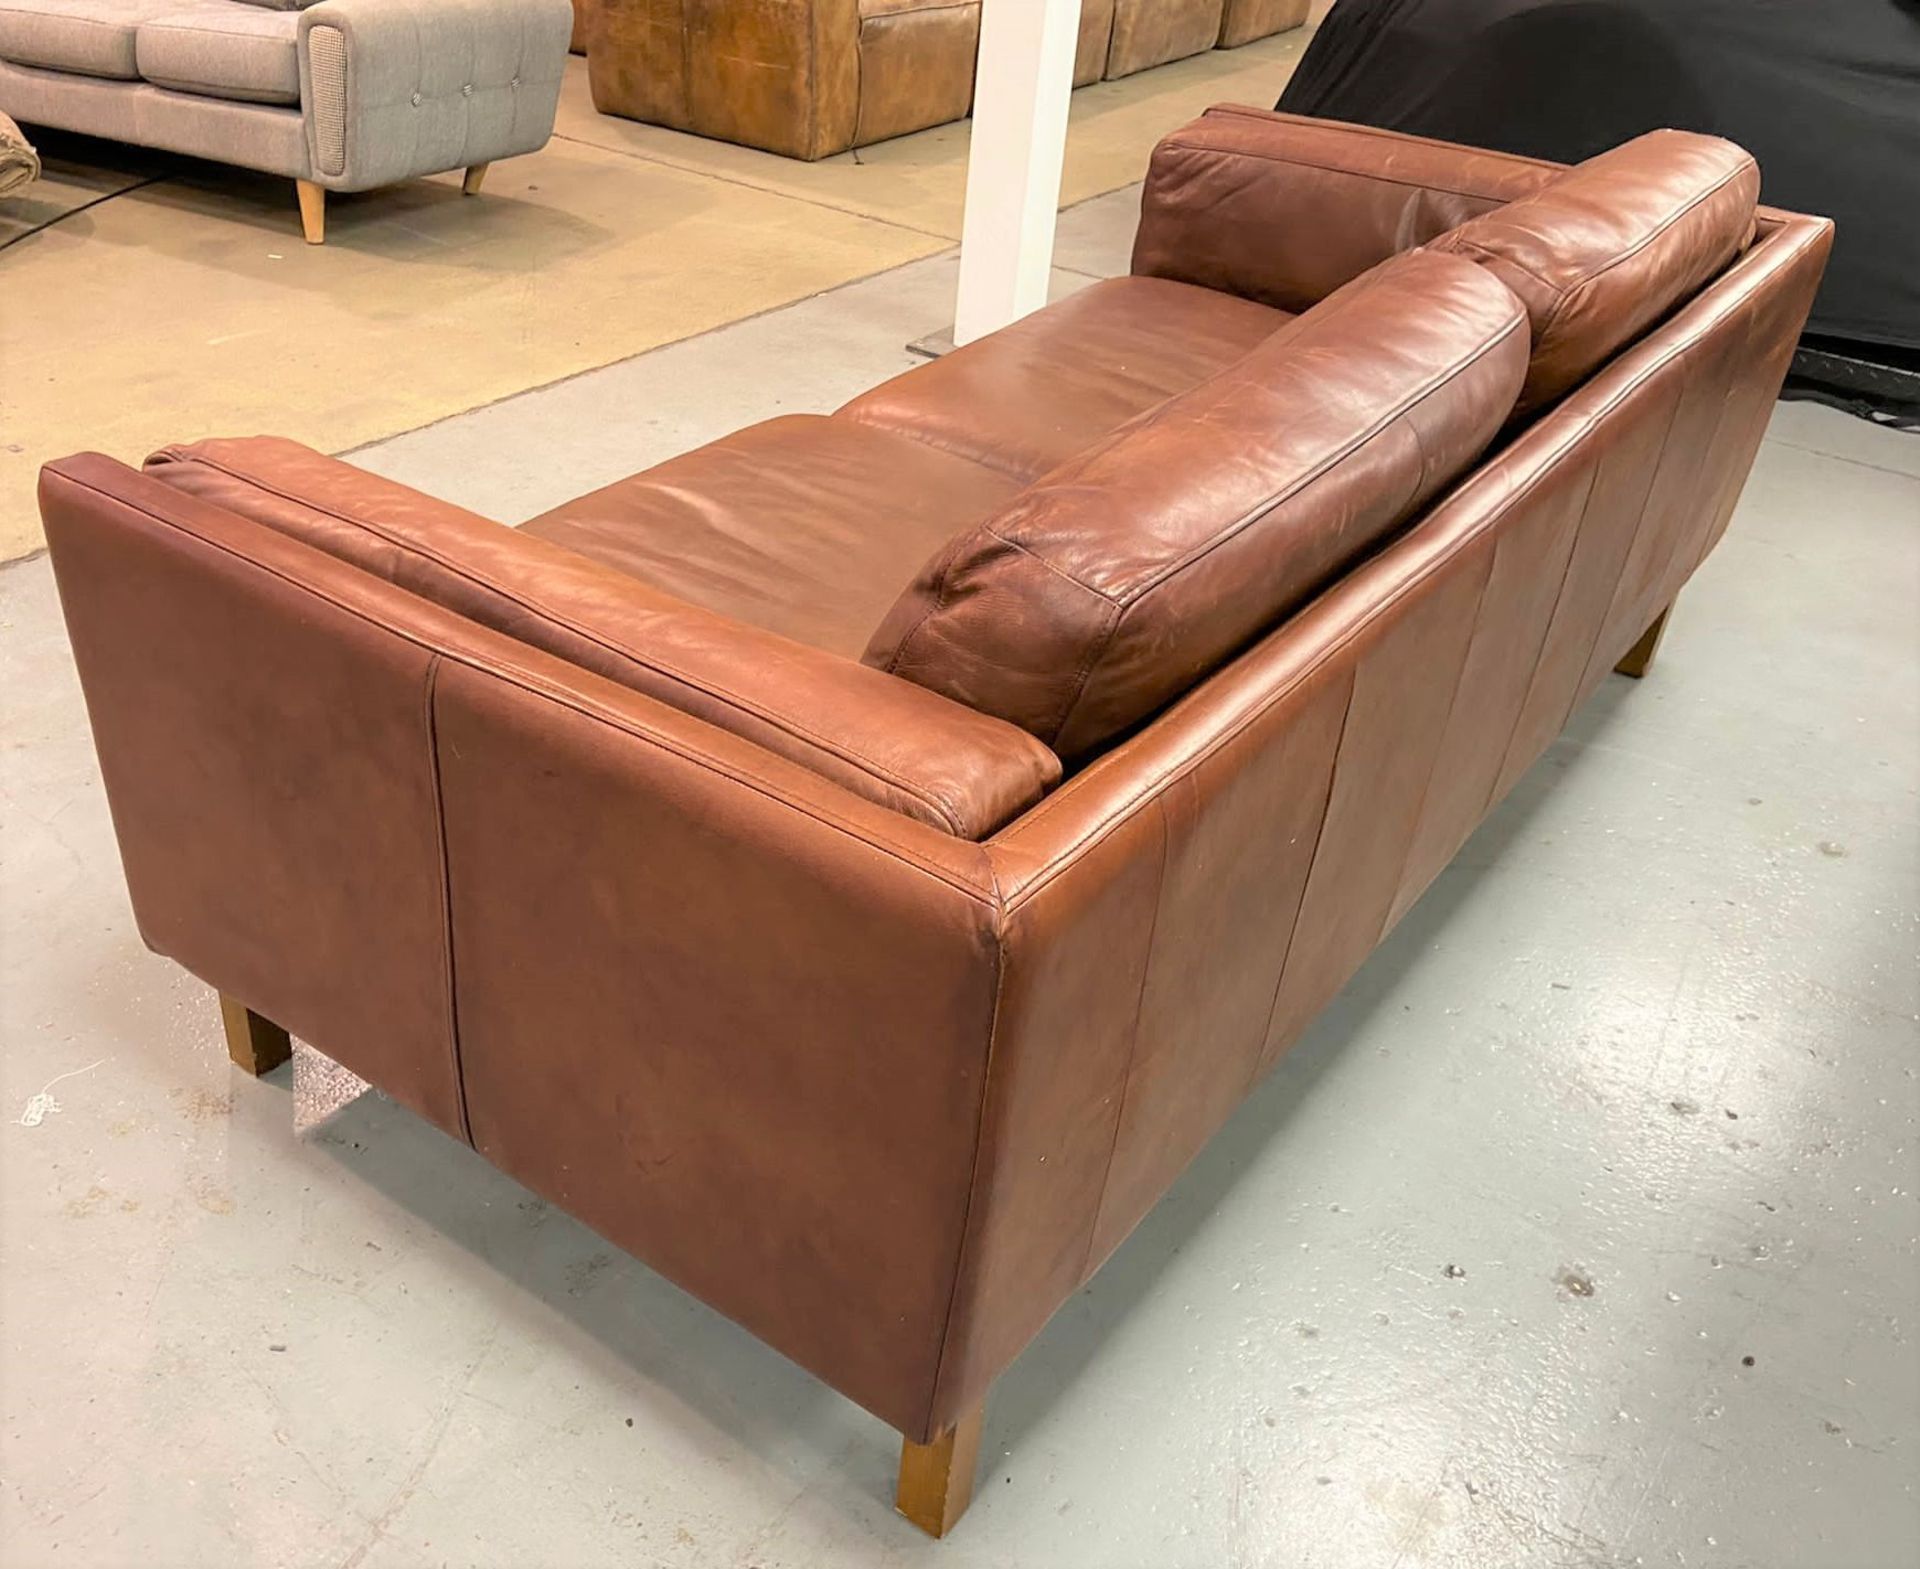 1 x West Elm Dekalb Contemporary Three Seater Sofa - Upholstered in Quality Tan Leather With Oak Fee - Image 6 of 6